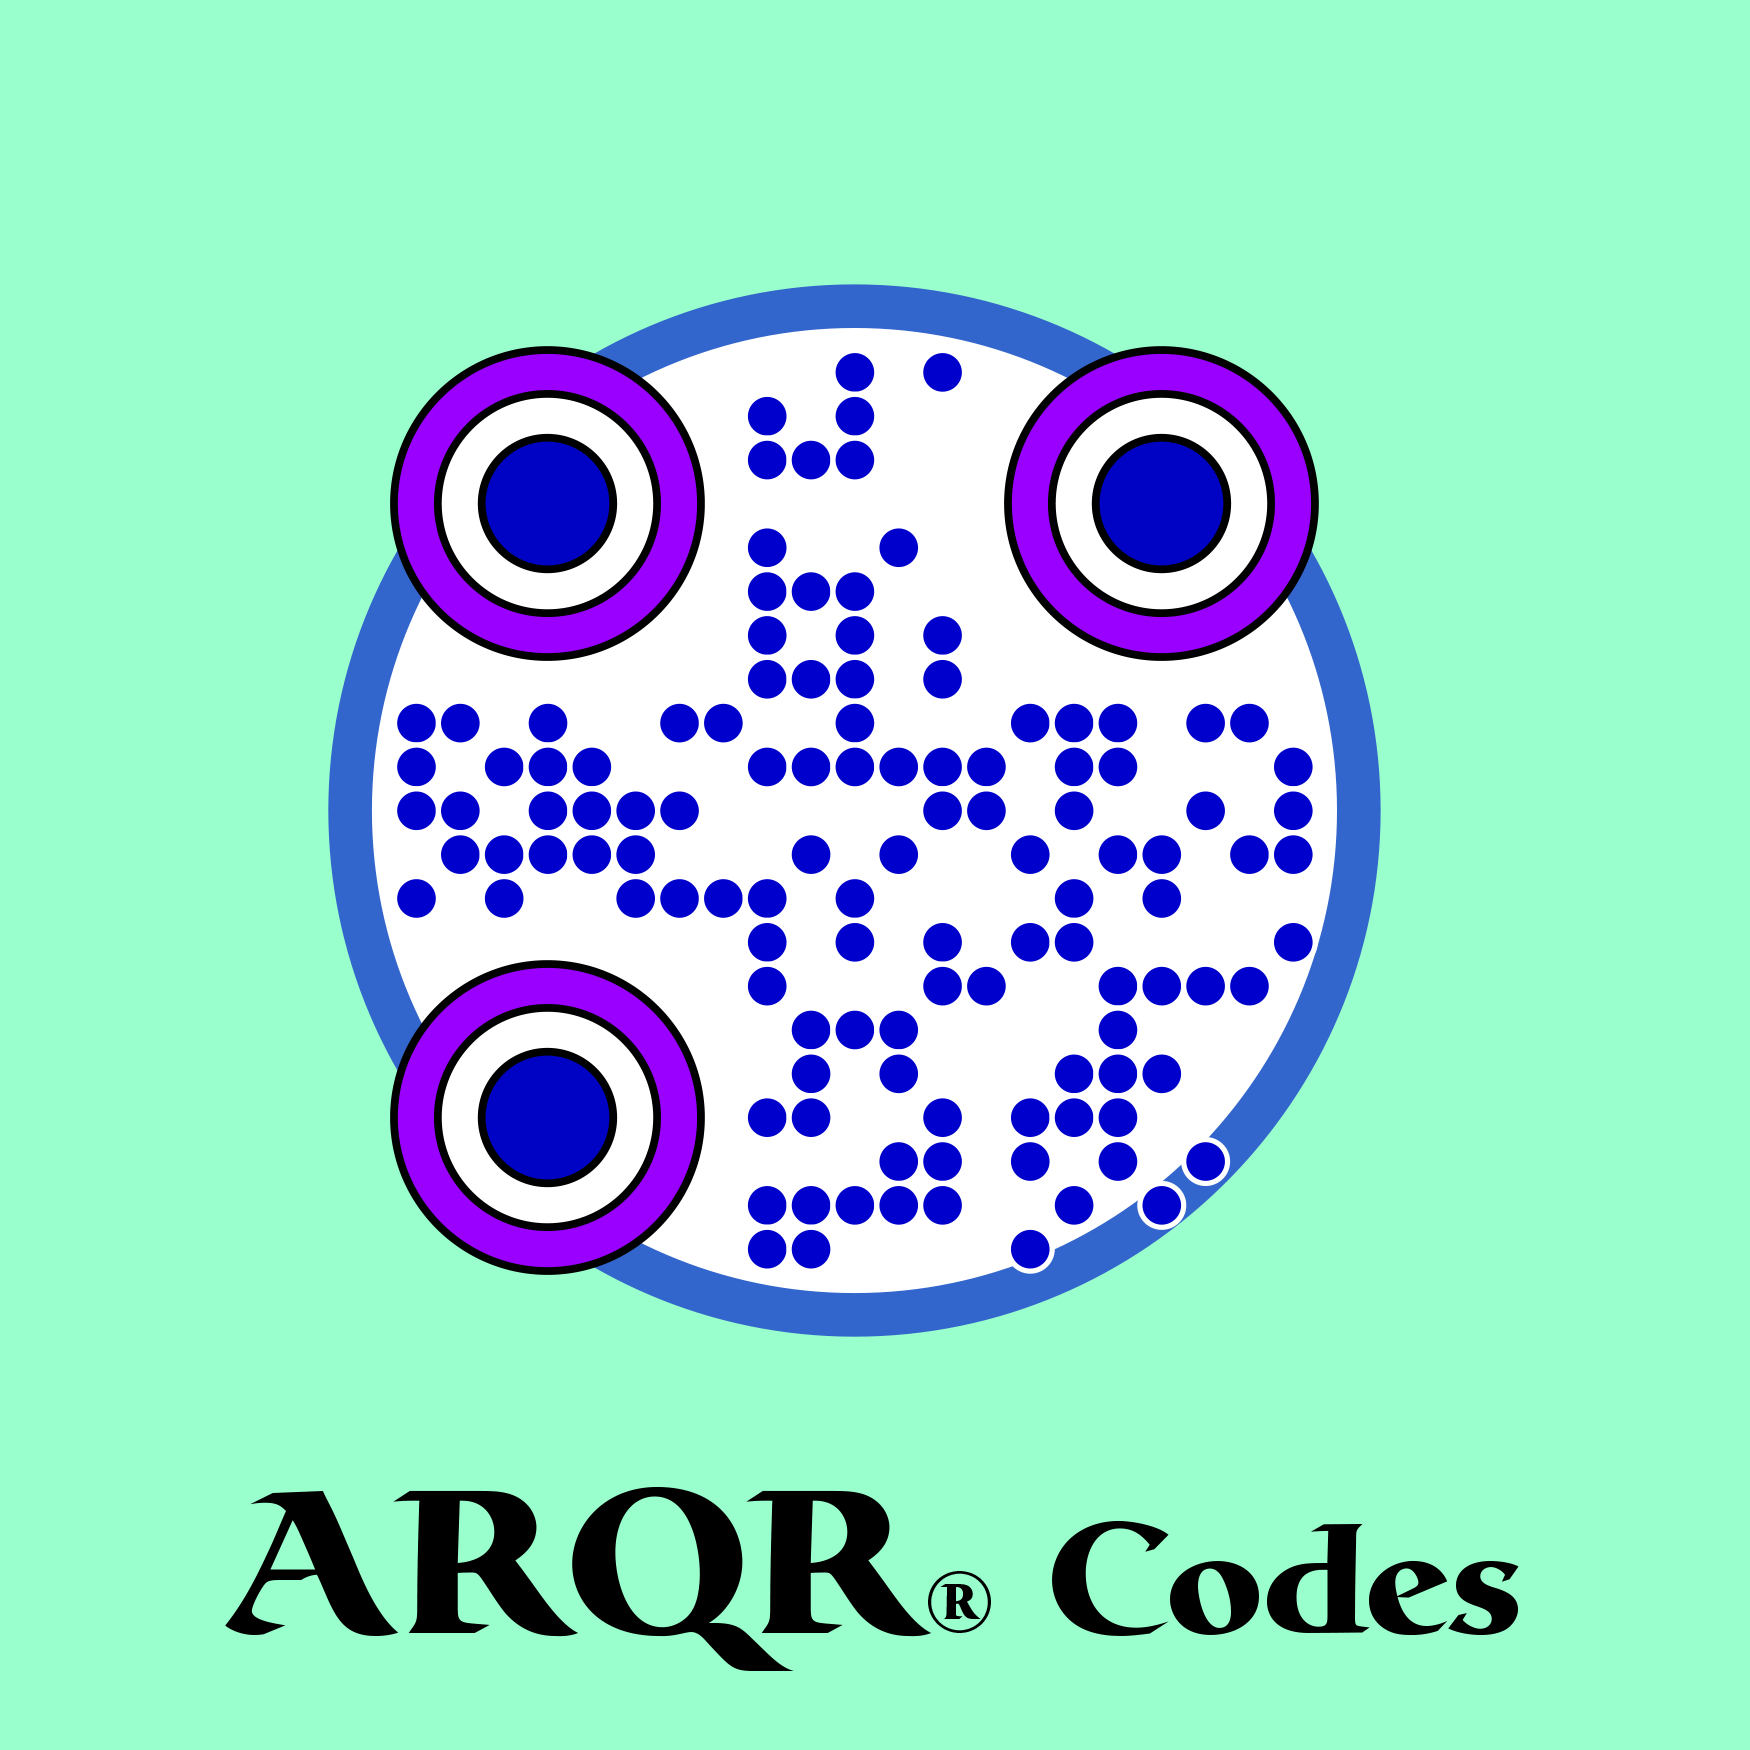 ARQR Code for arqr.com by Laird Marynick